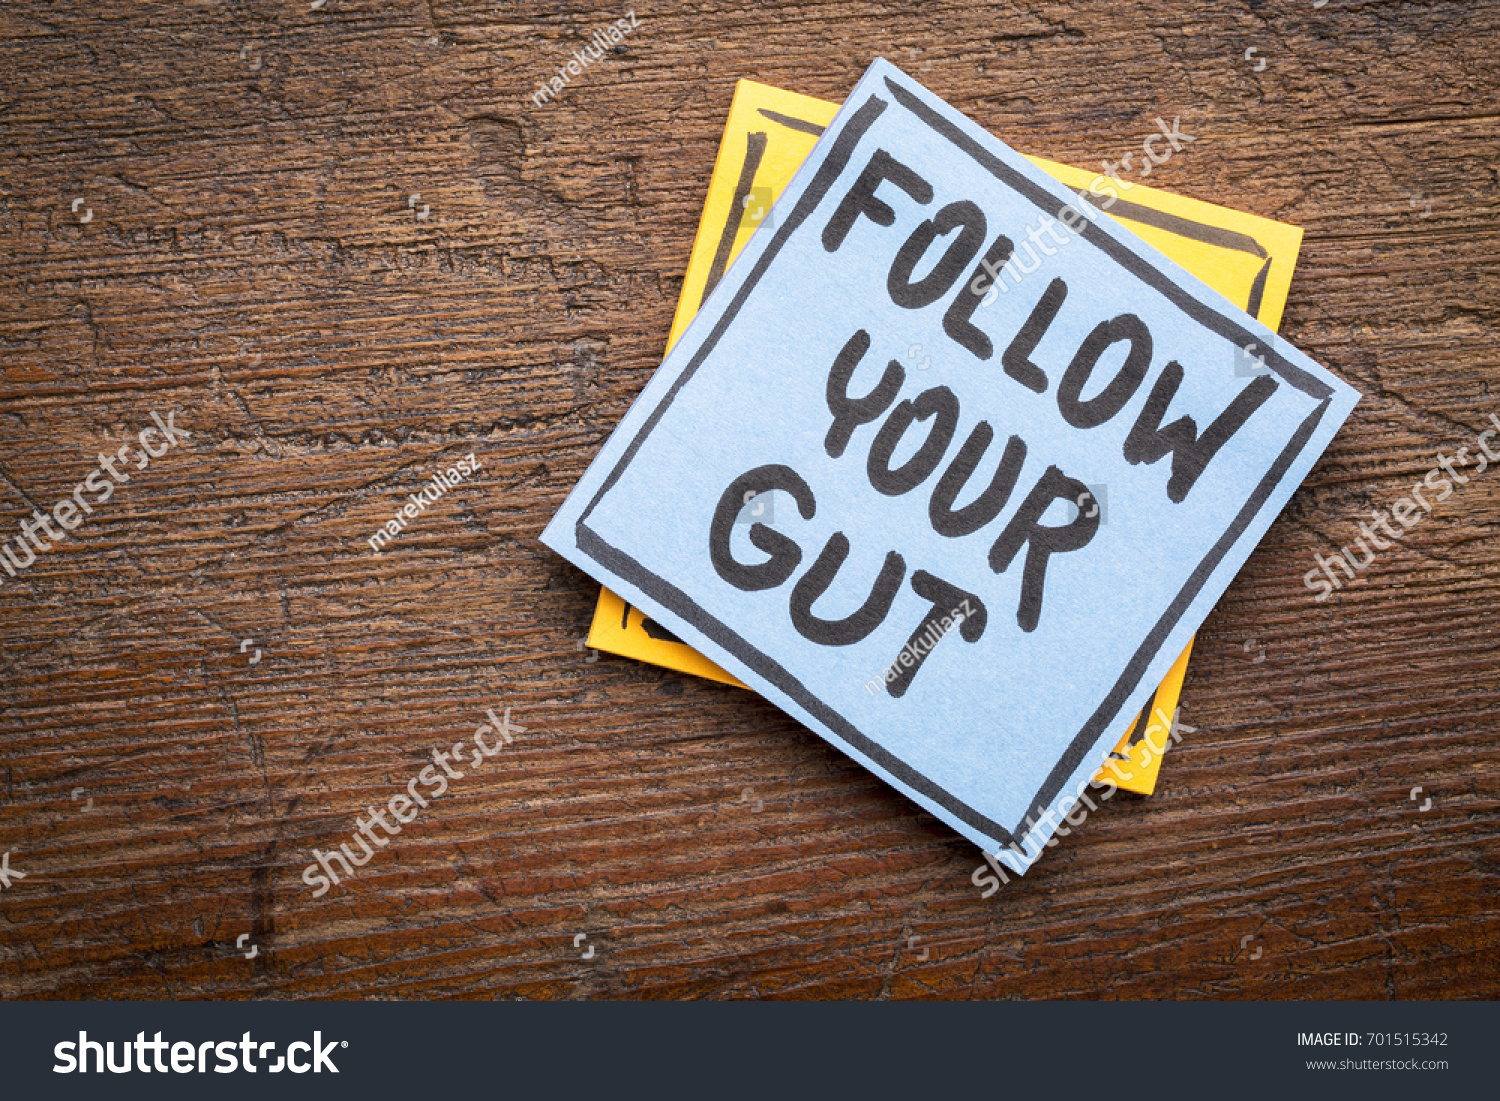 Follow your gut advice or reminder - handwriting on sticky note against rustic wood #701515342